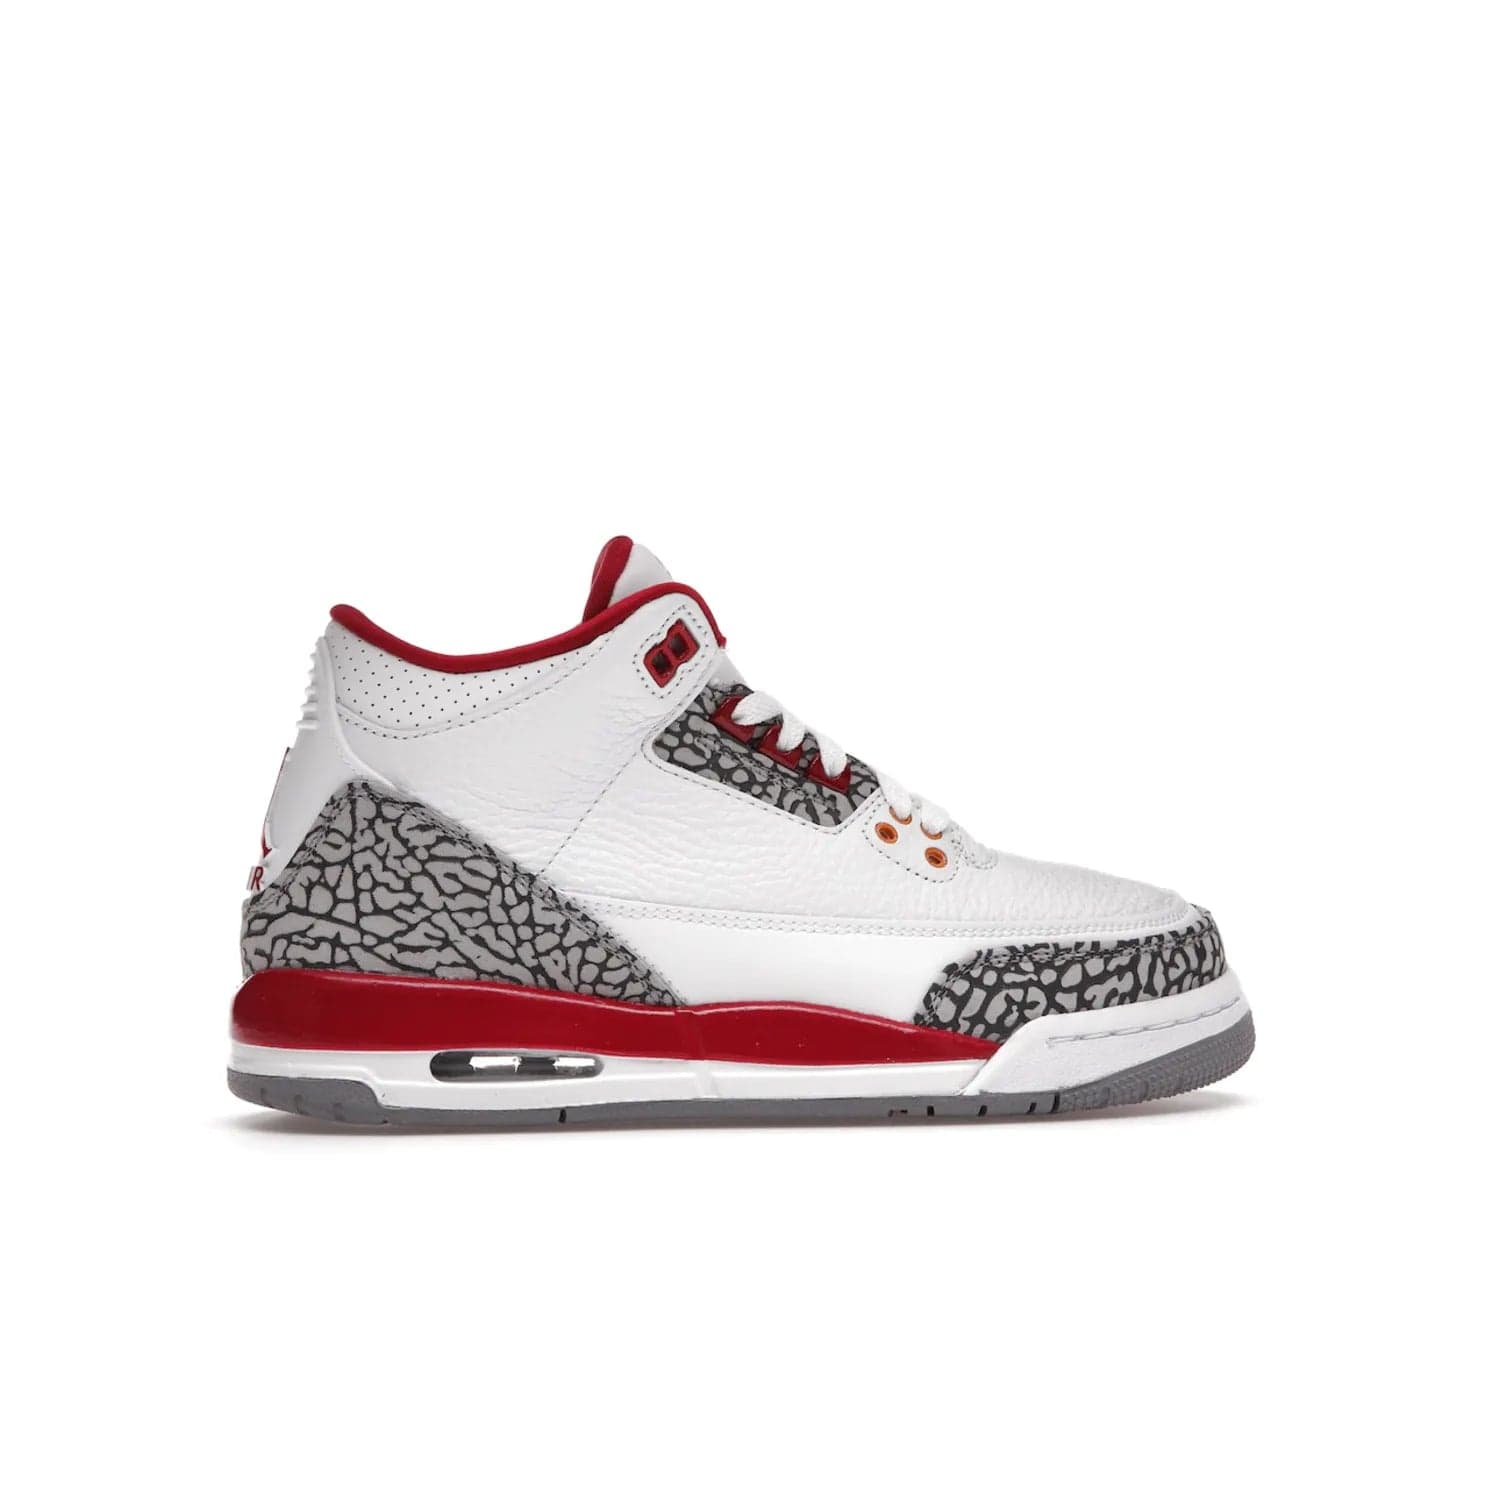 Jordan 3 Retro Cardinal (GS) - Image 36 - Only at www.BallersClubKickz.com - Shop the kid-sized Air Jordan 3 Retro Cardinal GS, released Feb 2022. White tumbled leather upper, light curry accenting, cement grey and classic red details throughout. Visible Air cushioning, midsole, and an eye-catching outsole. Show off your style with this fashionable streetwear silhouette.